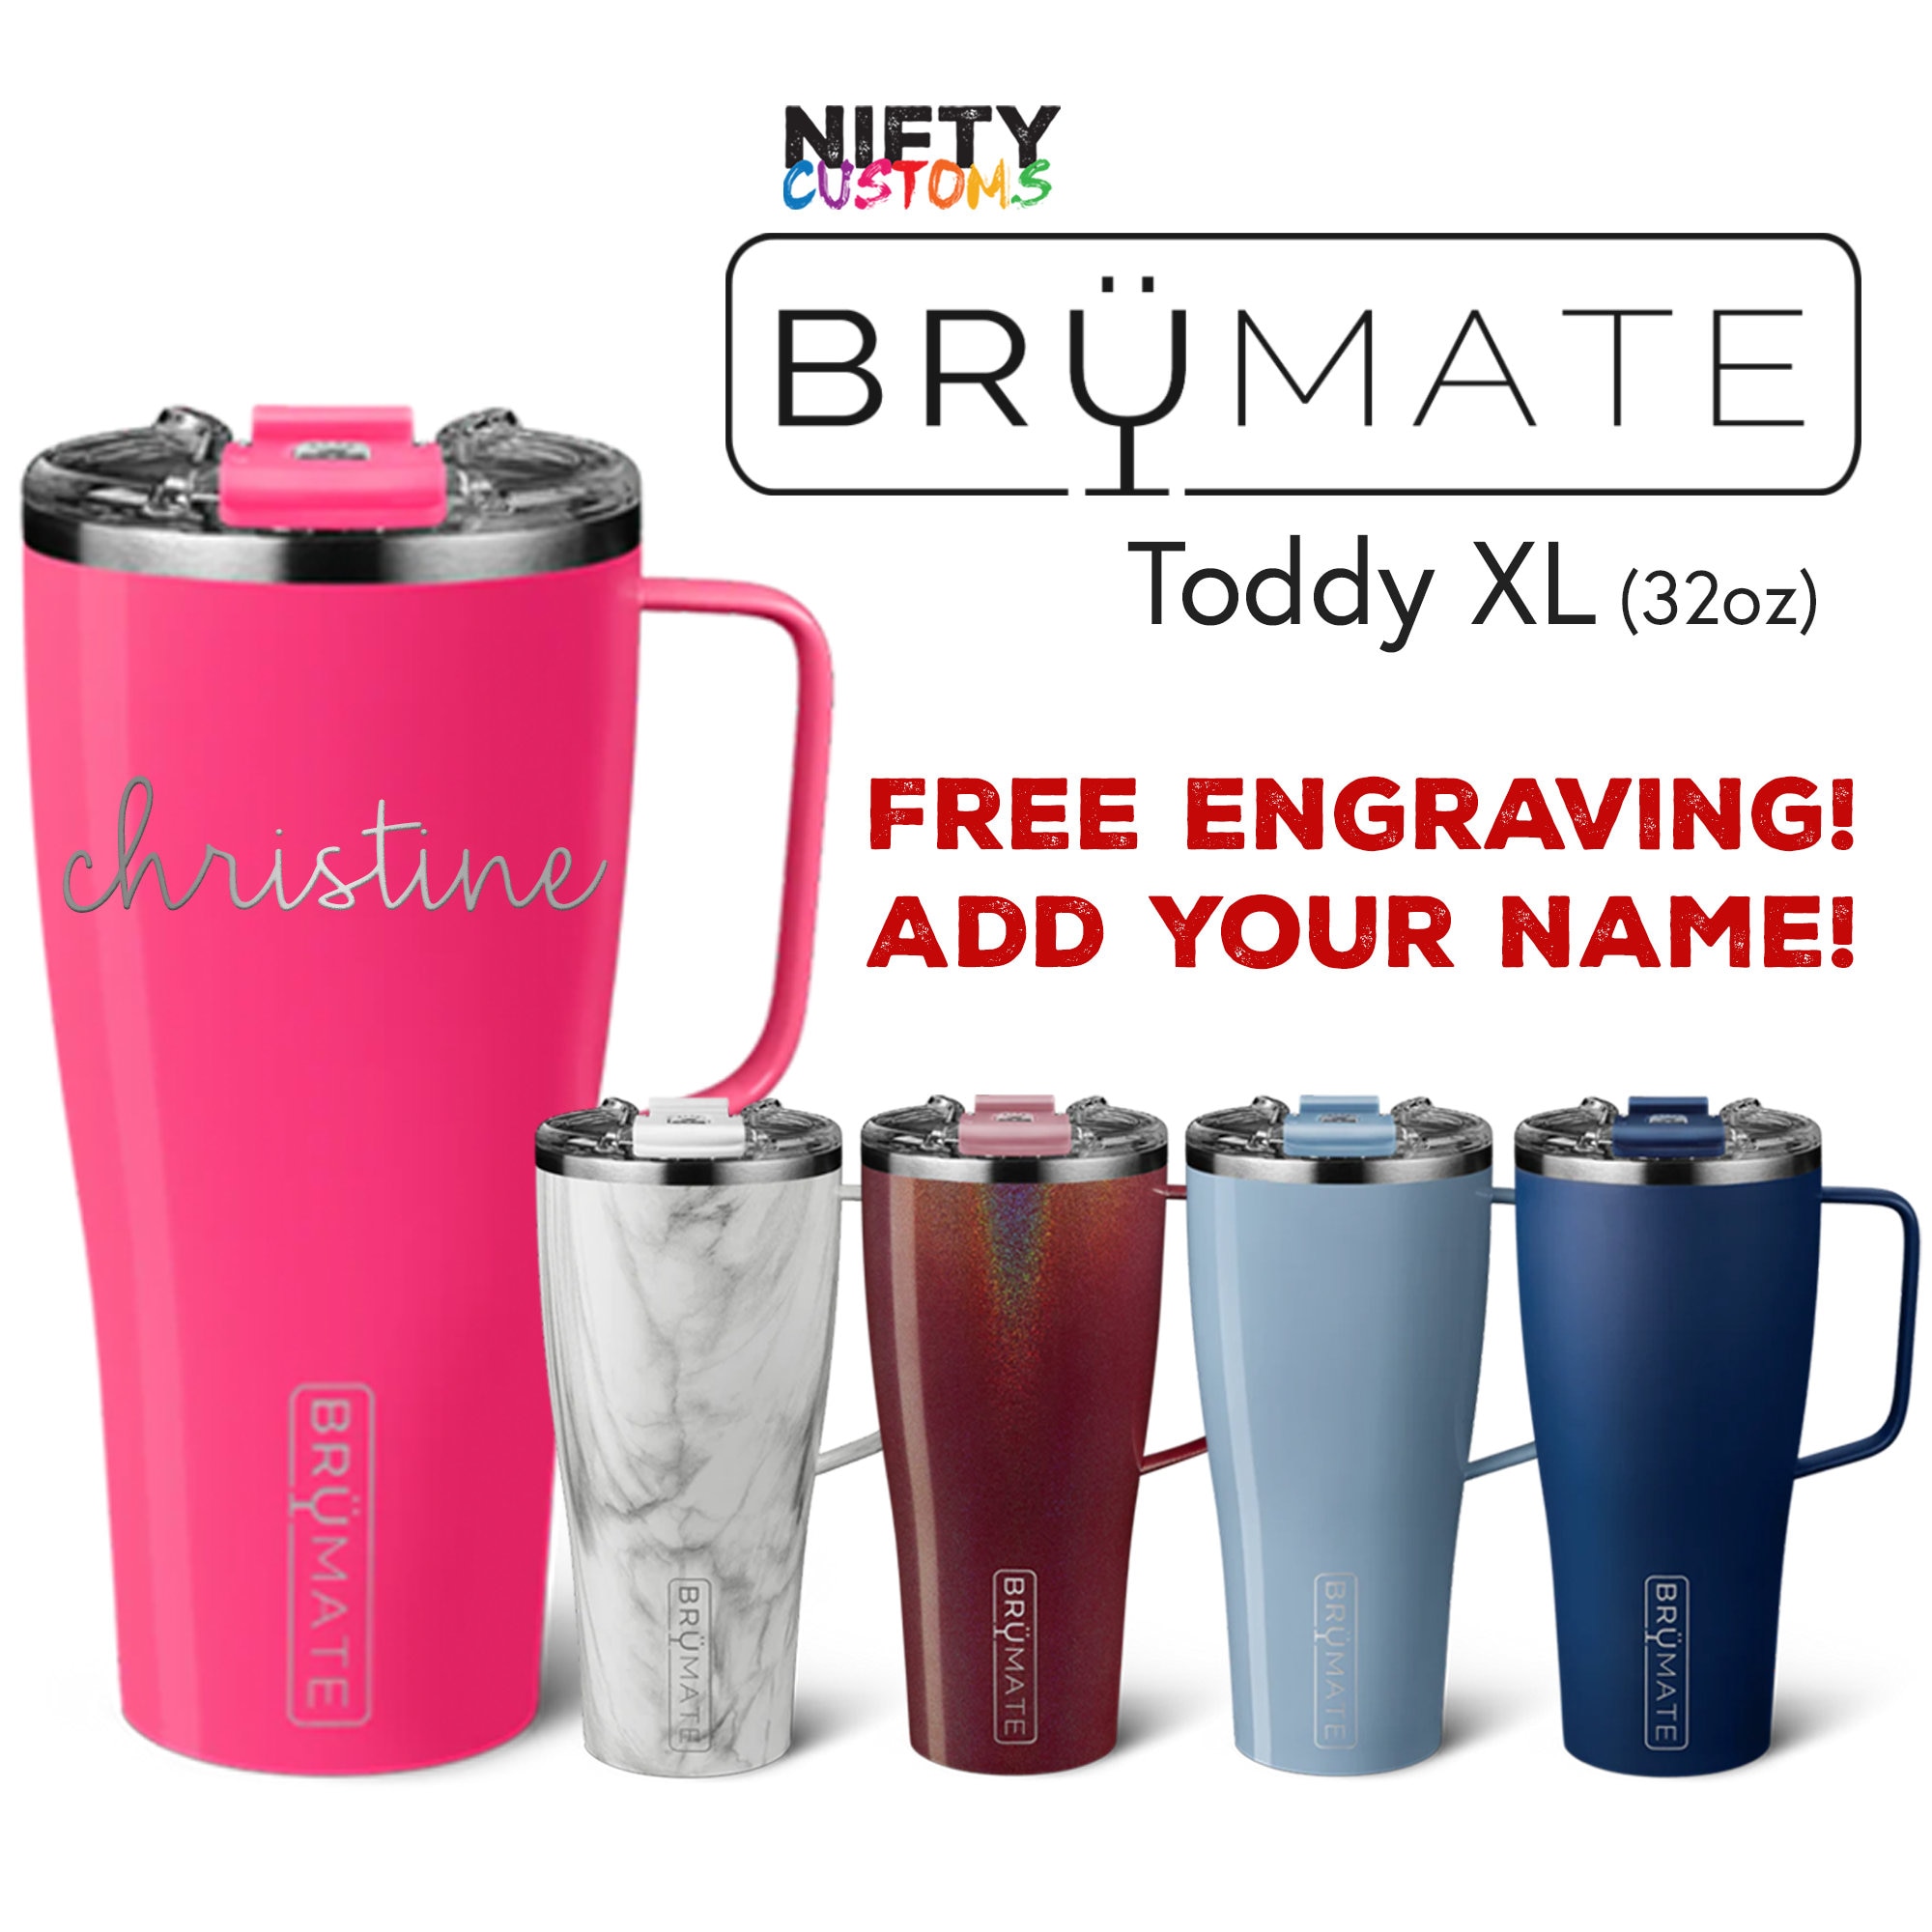 Personalized Brumate Toddy XL Brümate Coffee Cup 32oz Mug Insulated  Stainless Steel FREE Laser Engraving 